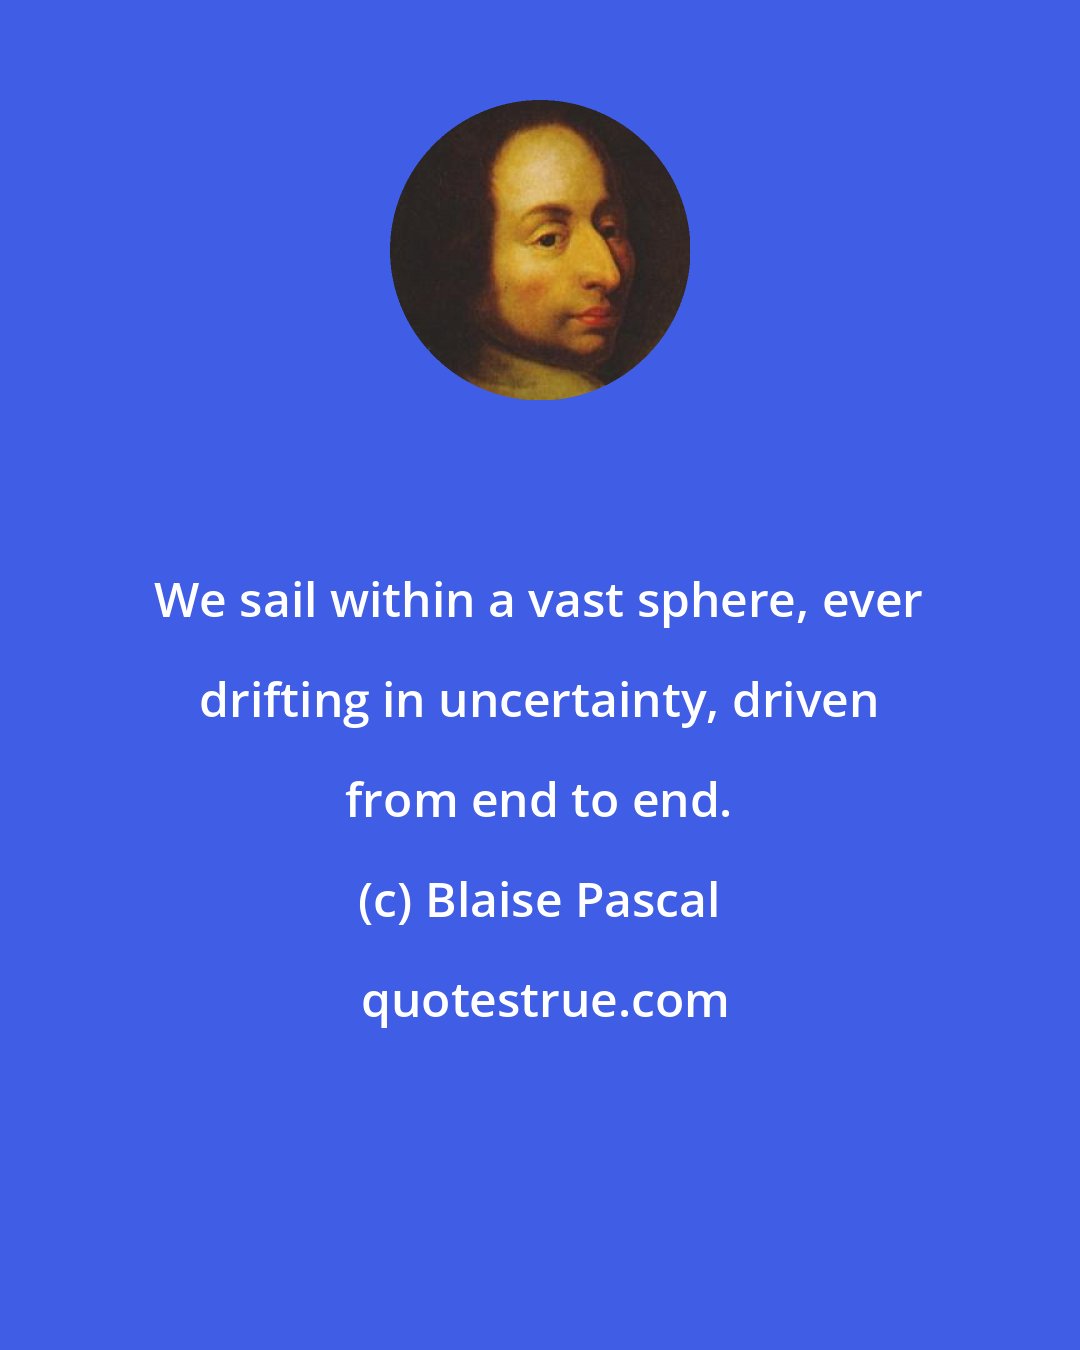 Blaise Pascal: We sail within a vast sphere, ever drifting in uncertainty, driven from end to end.